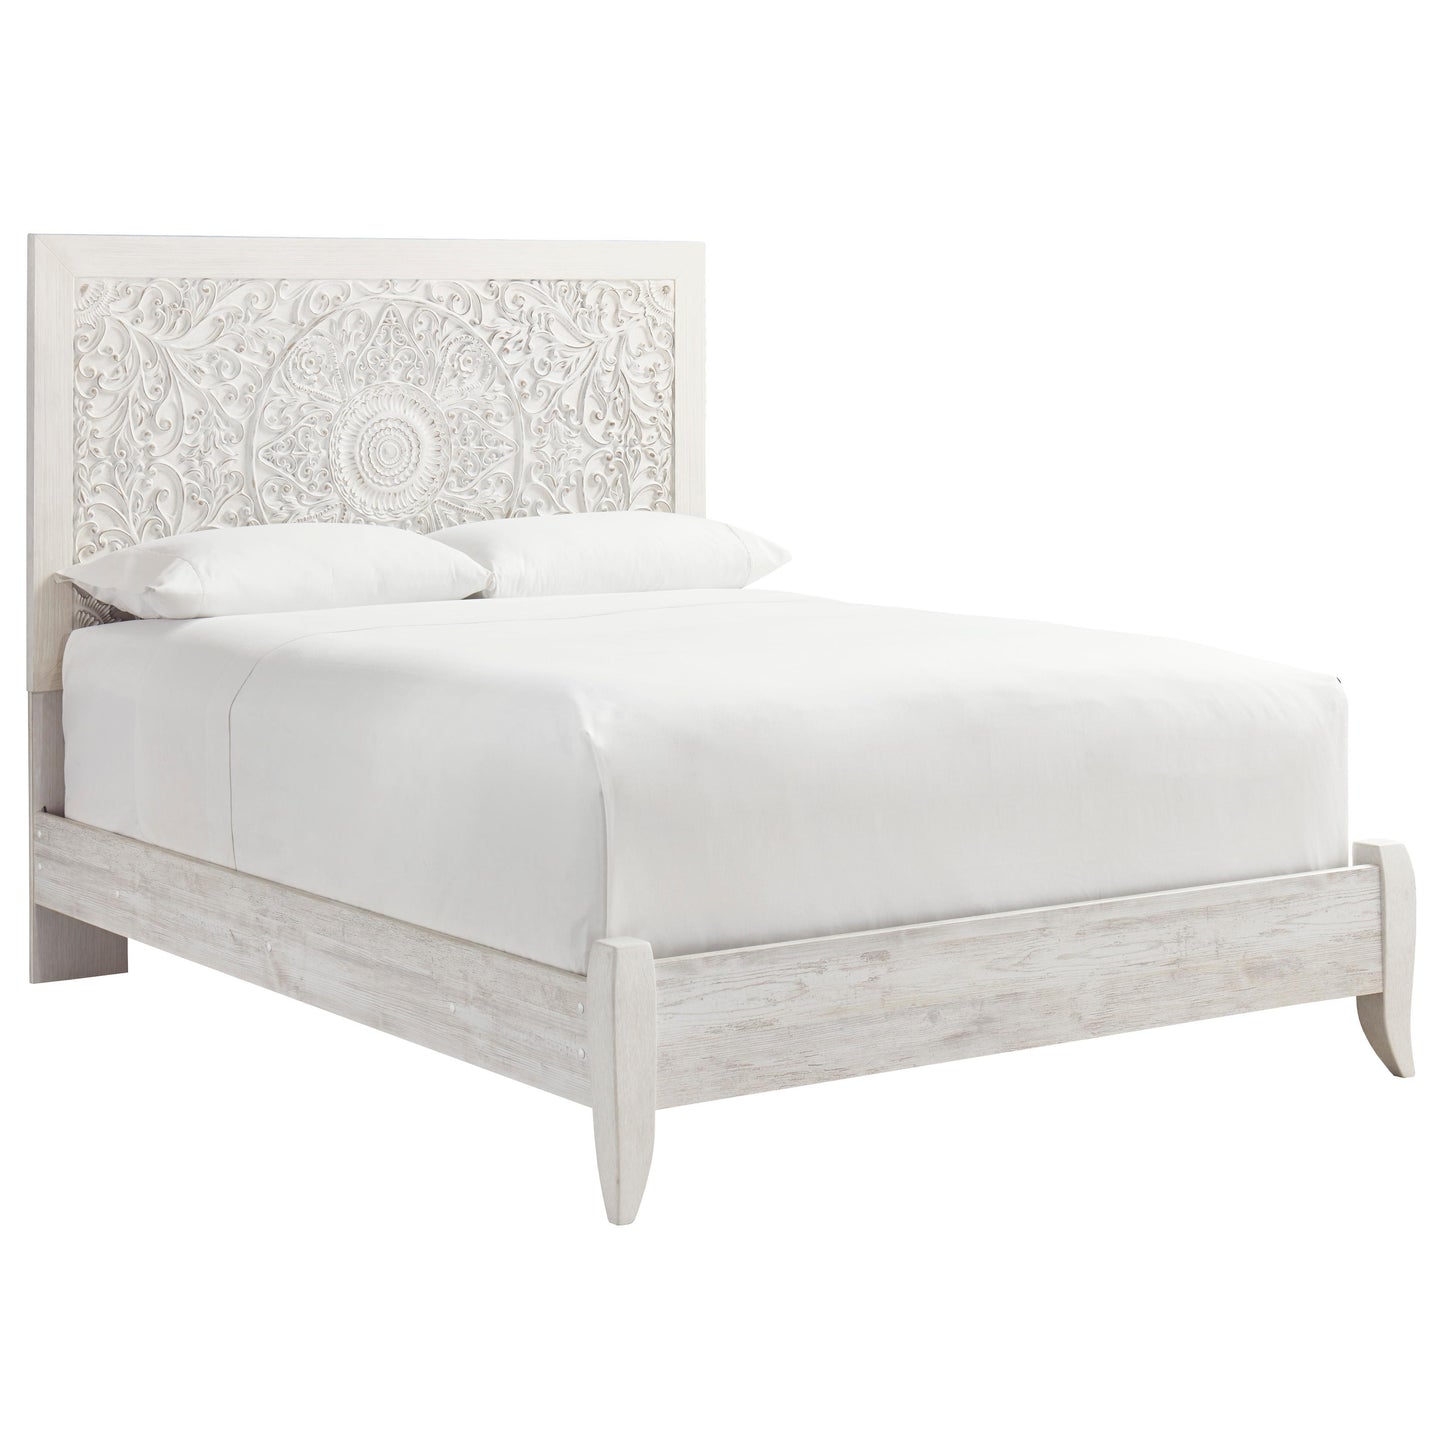 Signature Design by Ashley Paxberry Queen Panel Bed B181-57/B181-54